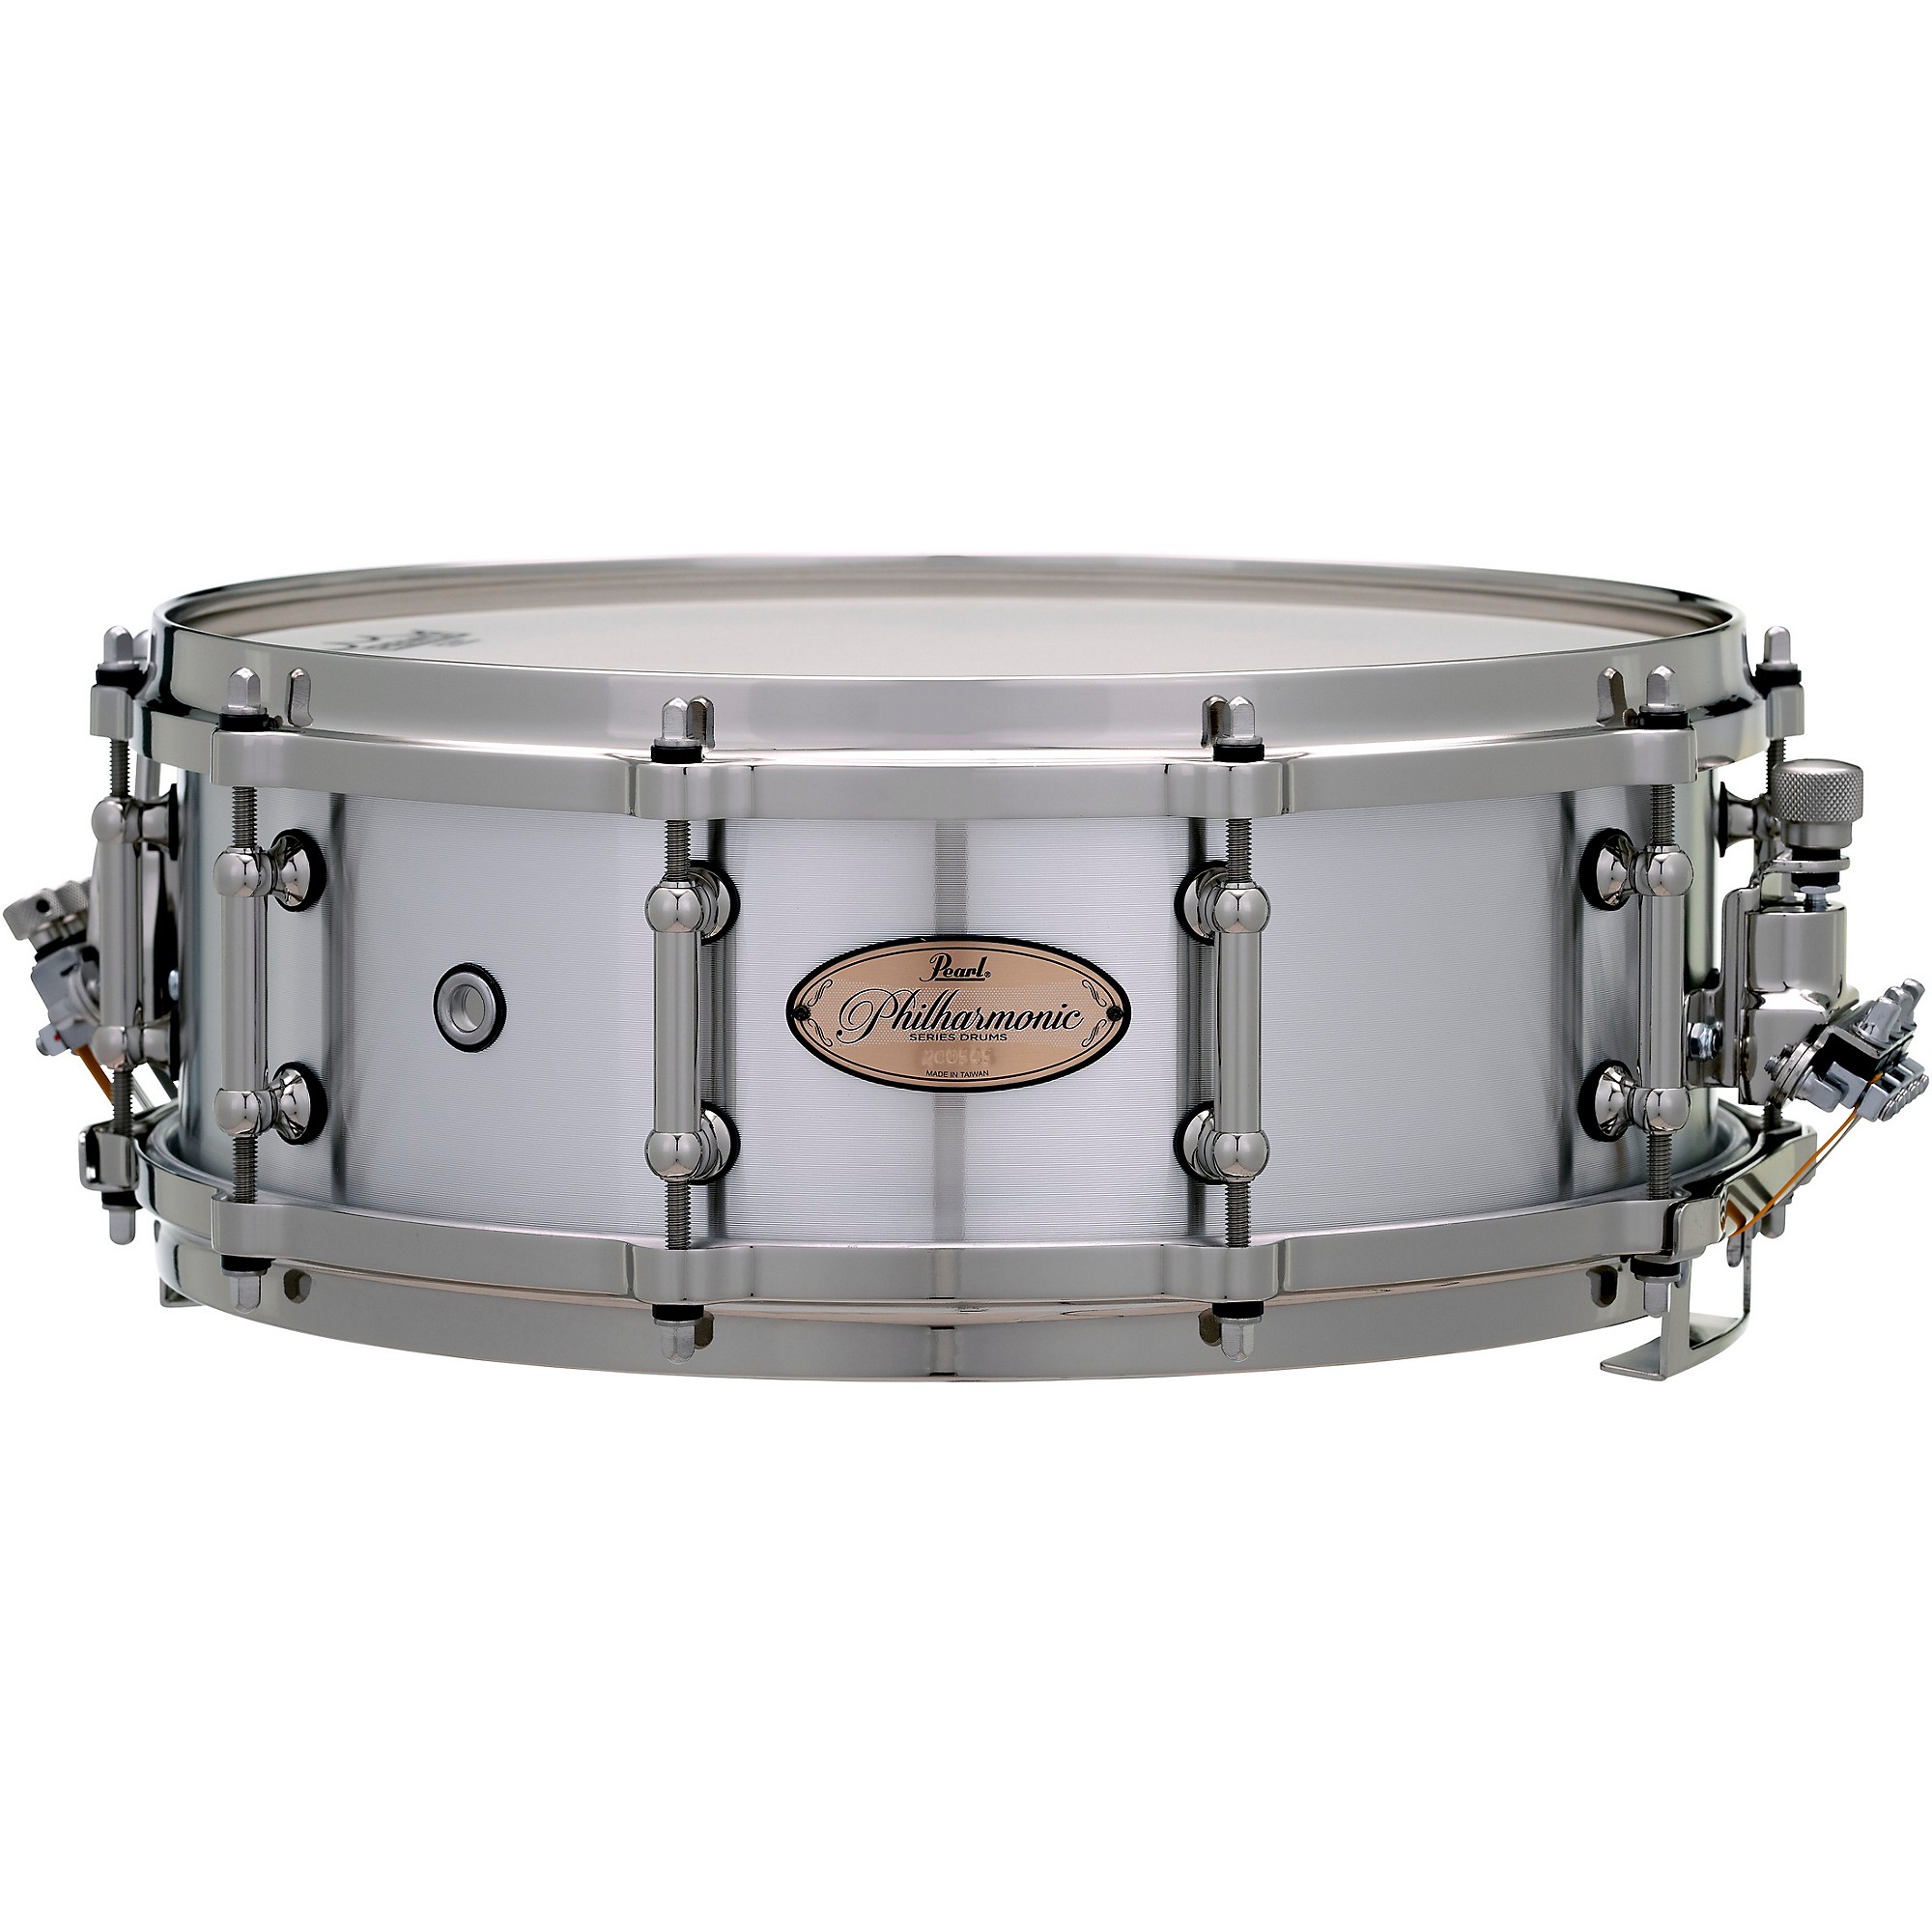 Pearl Drums on X: Here's the Limited Edition Philharmonic Snare